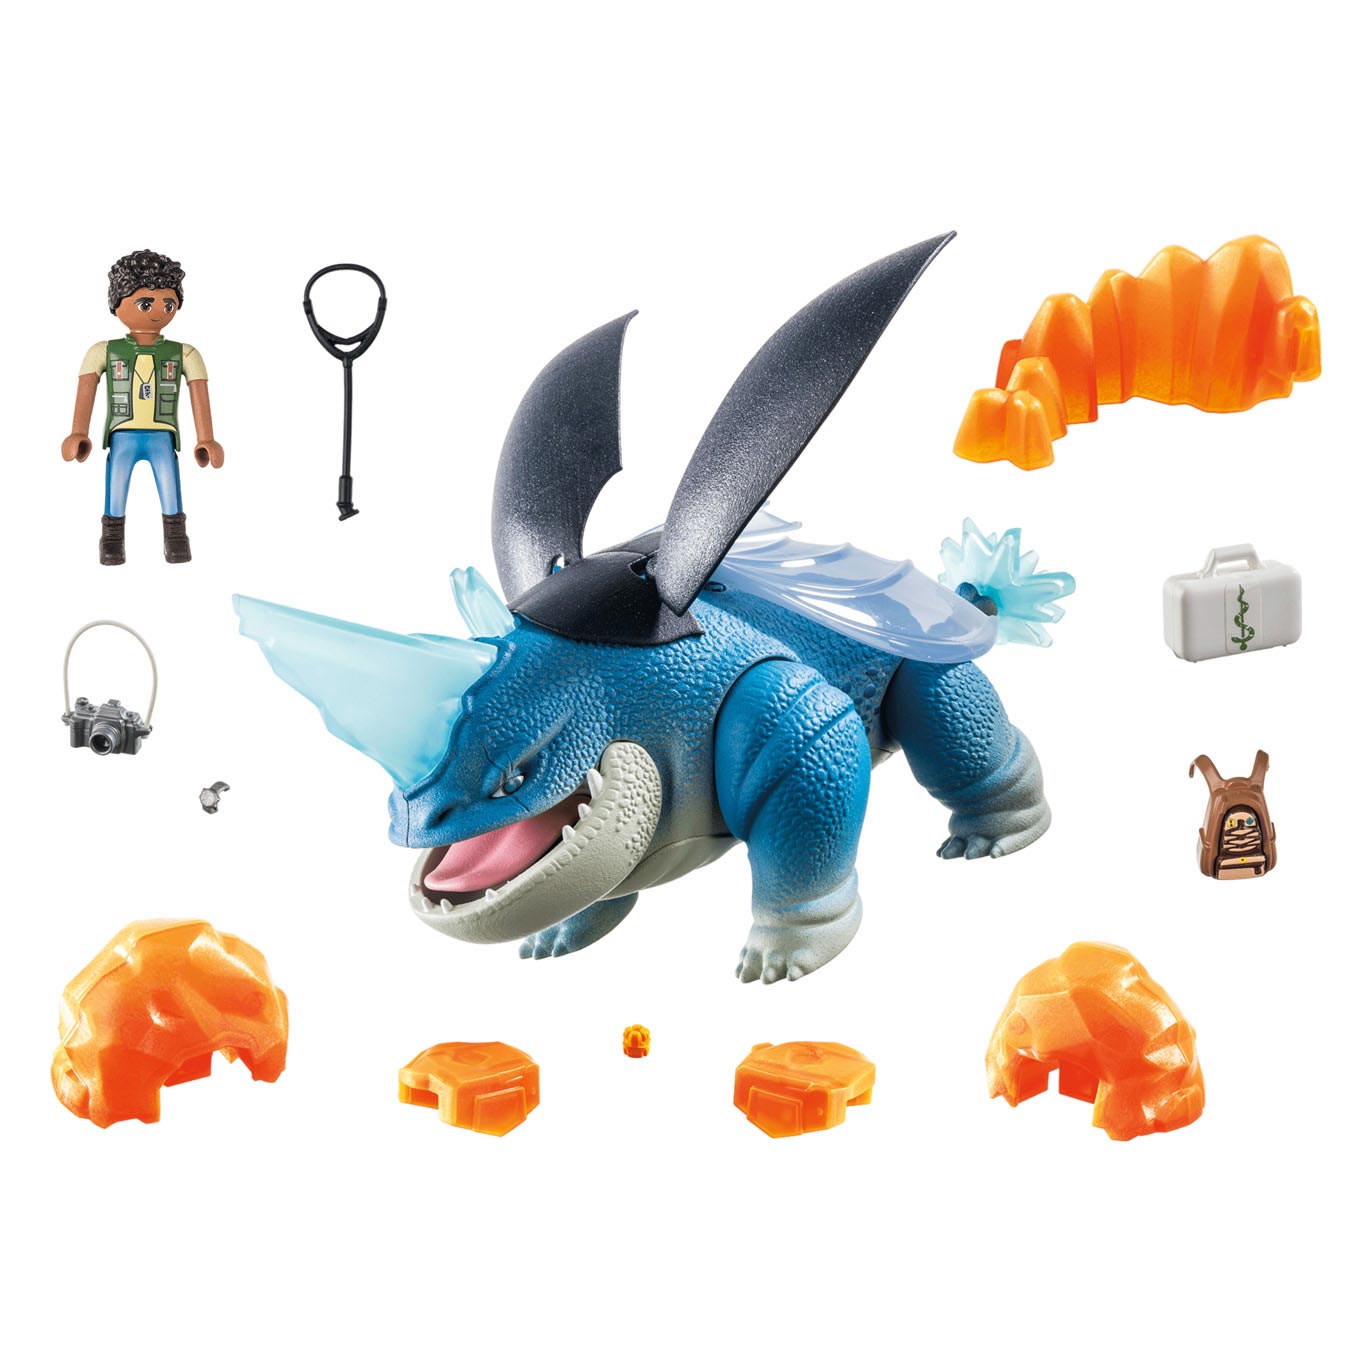 Playmobil Dragons : Les Neuf Royaumes Ploughhorn & D'Angelo - 71082